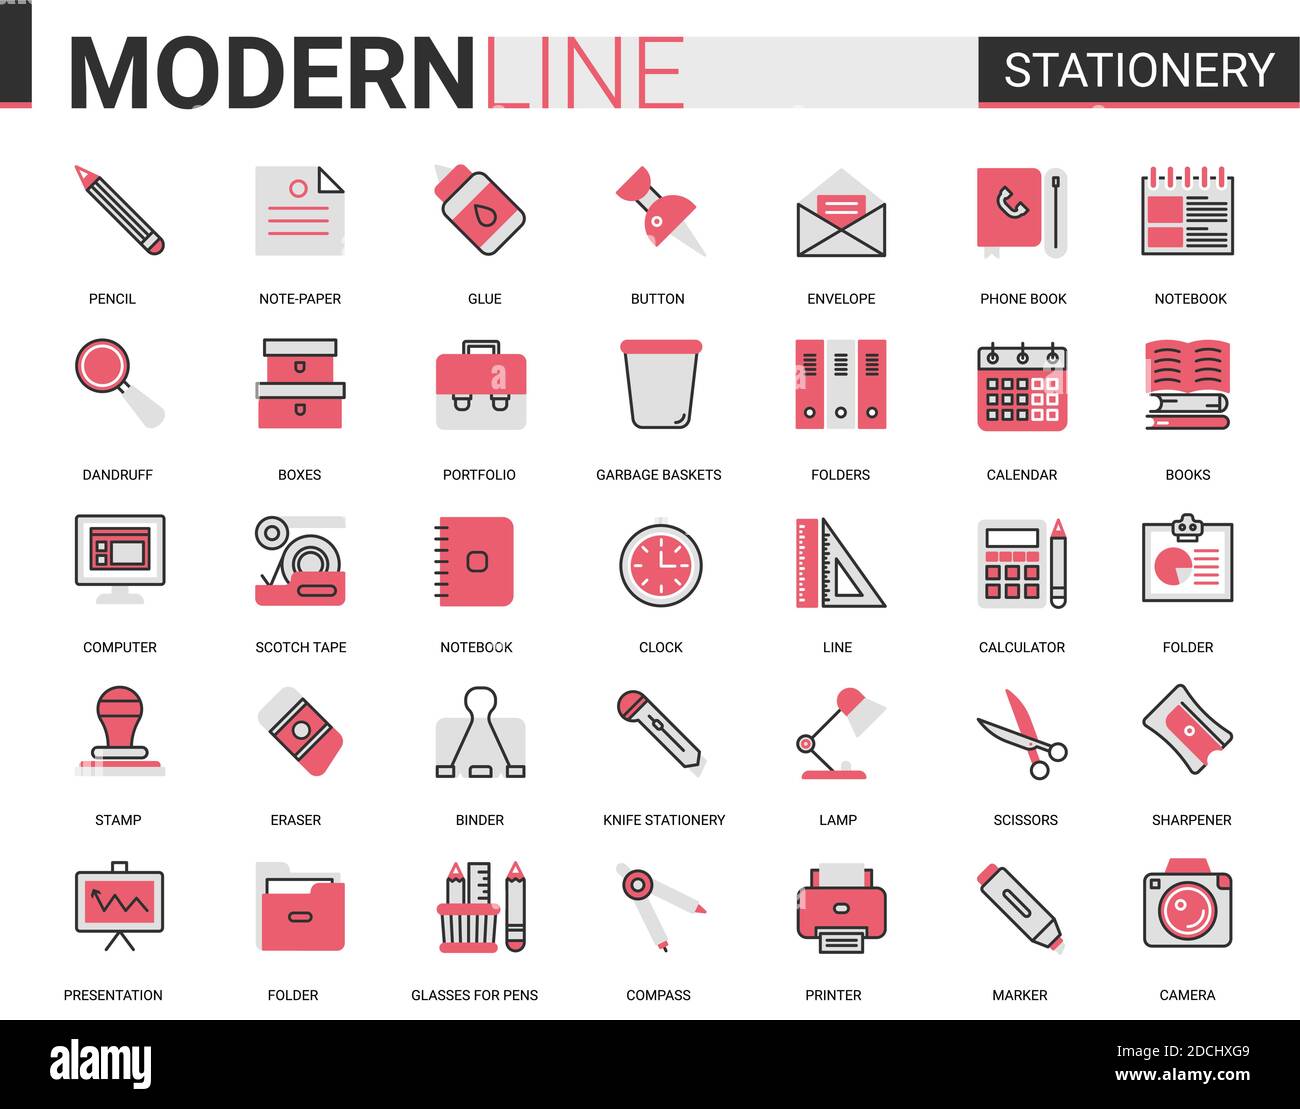 Stationery red black flat line icon vector illustration set. Linear school and business office supplies symbols collection with pen pencil scissors folder glue calculator calendar notebook book folder Stock Vector